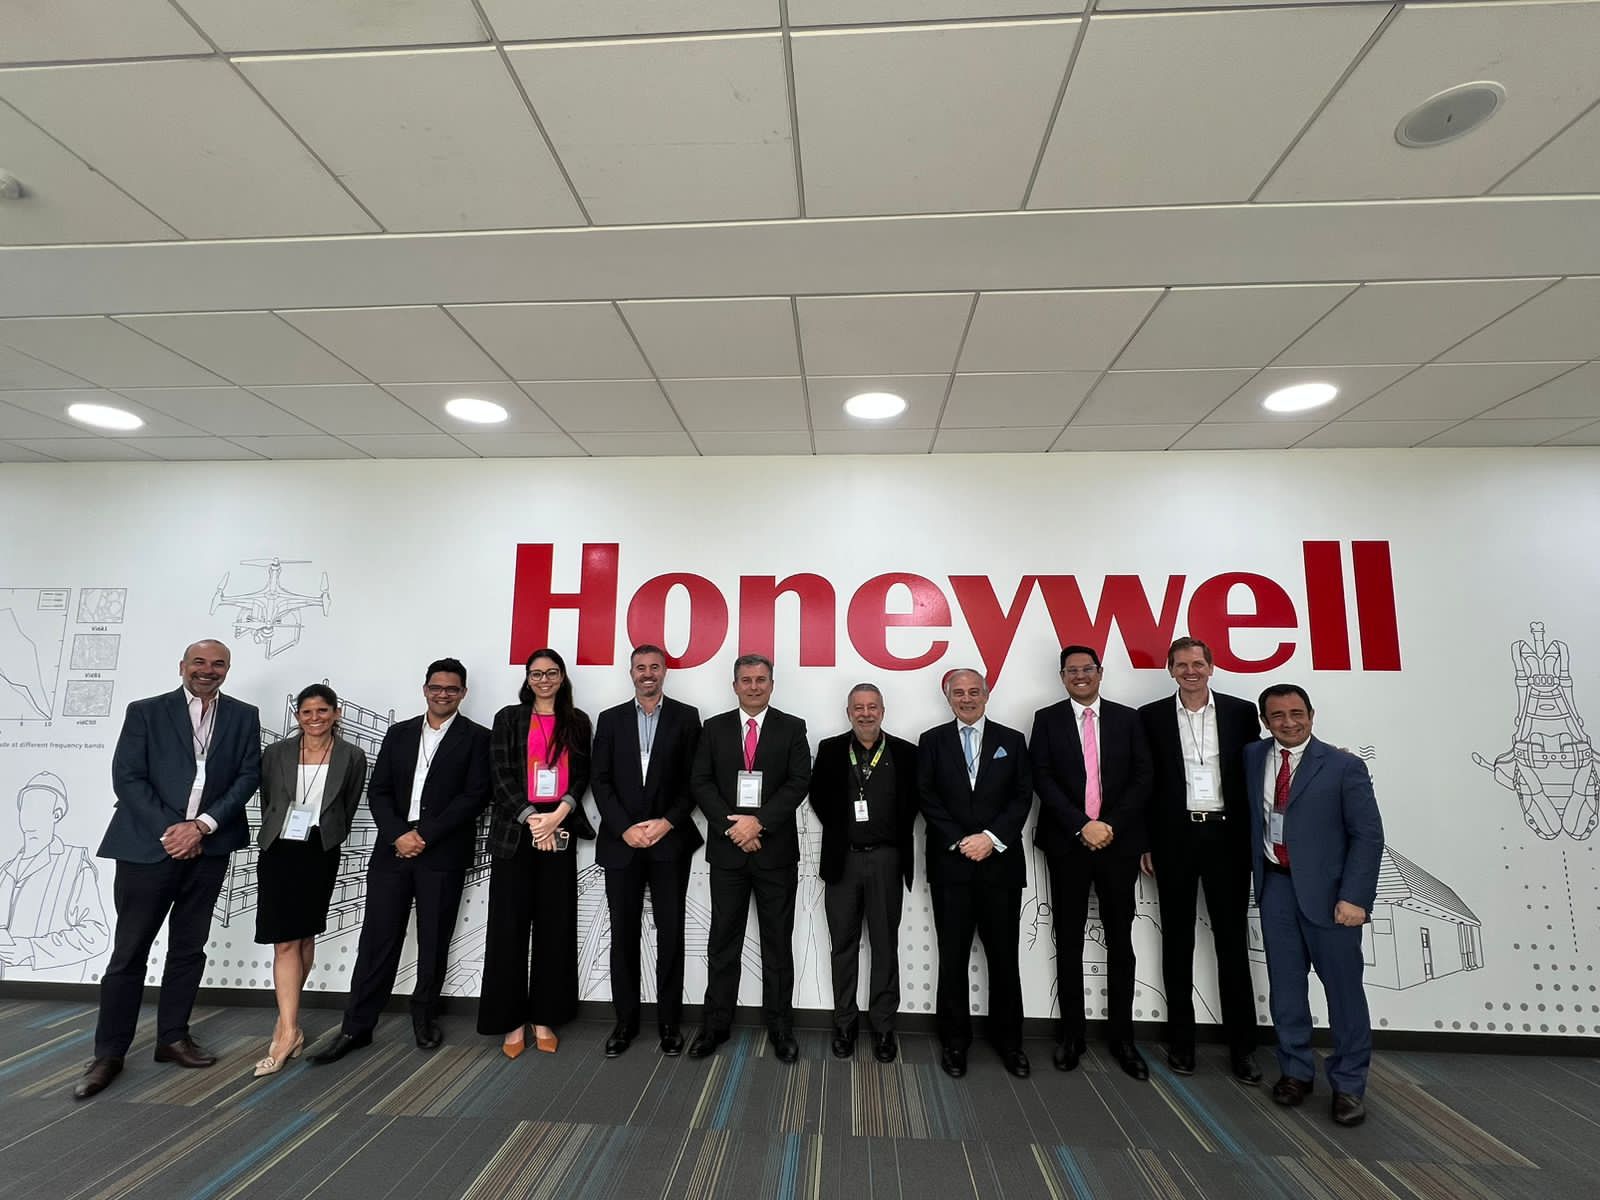 Hydrogen as an Ally on the Road to Net-Zero, Workshop Organized by Arpel and Honeywell